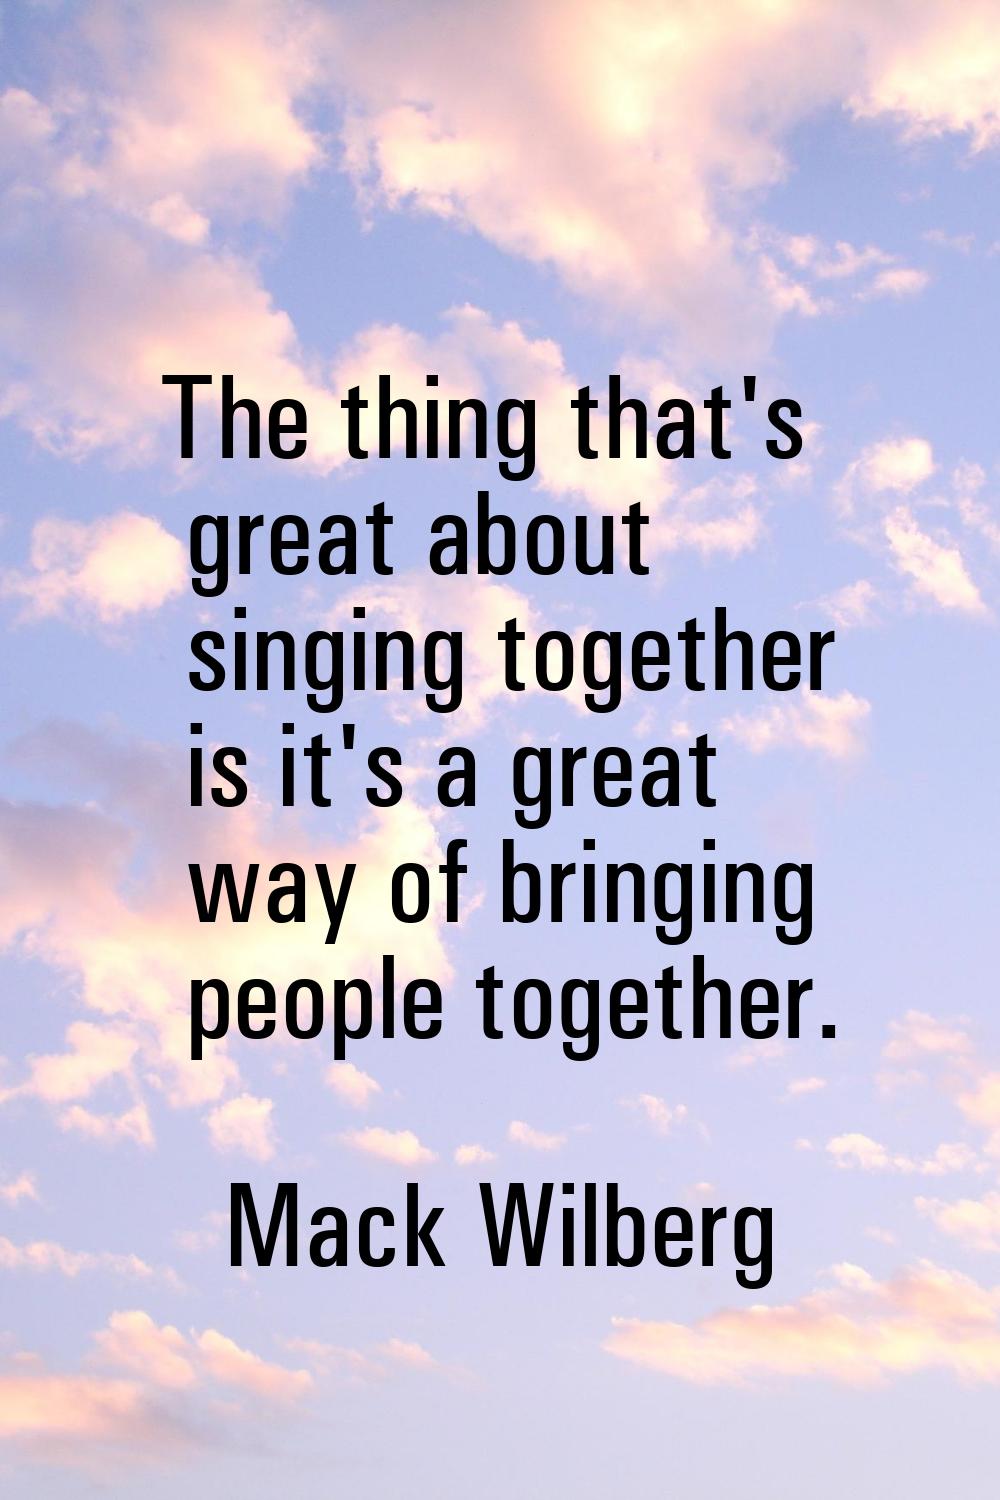 The thing that's great about singing together is it's a great way of bringing people together.